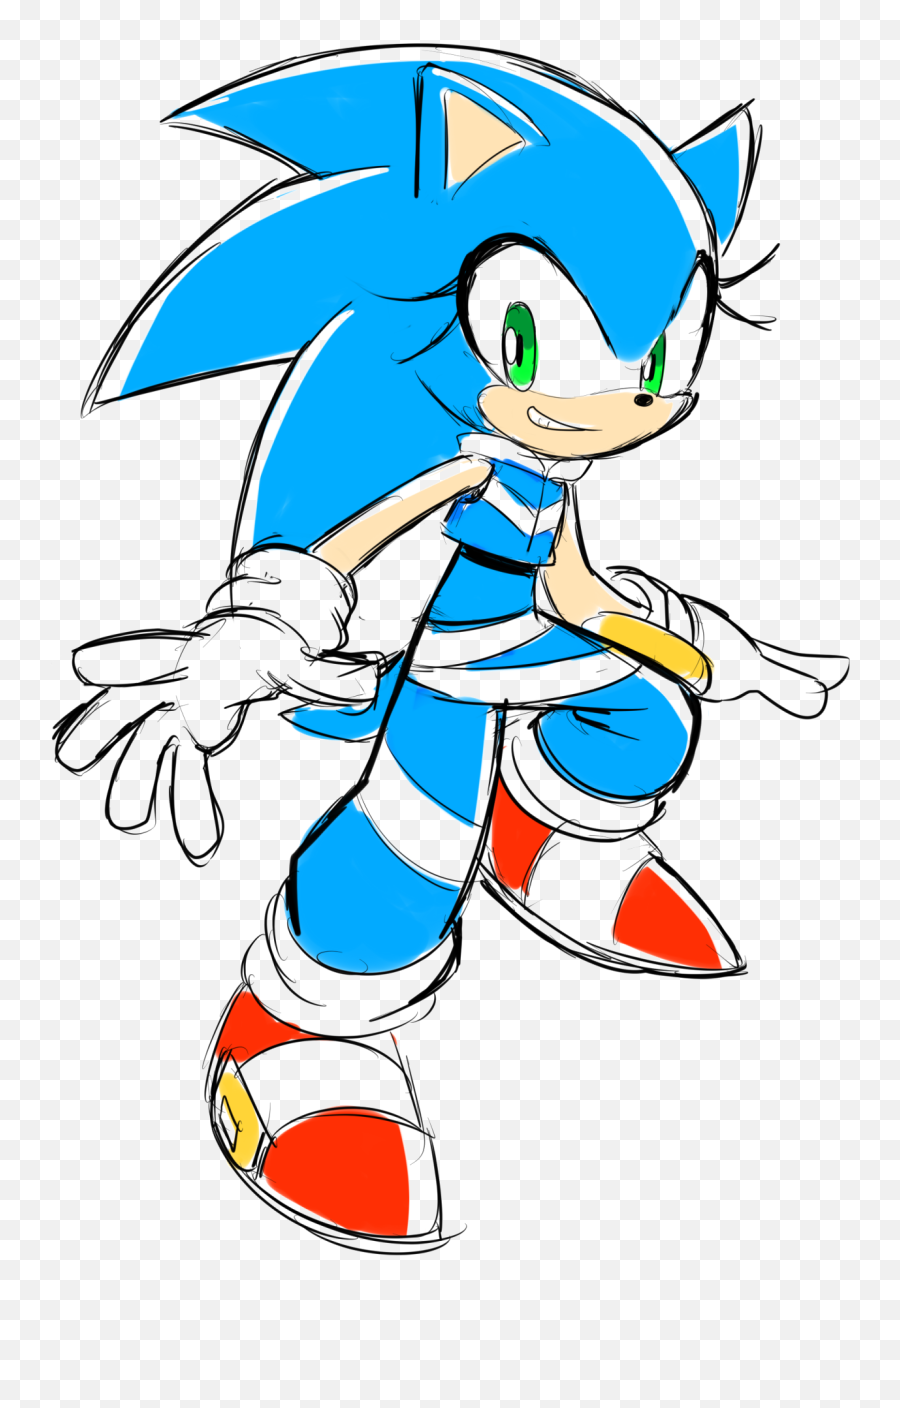 Sonic The Hedgehog Png Image Background - Sonic The Hedgehog Oc,Sonic The Hedgehog Transparent